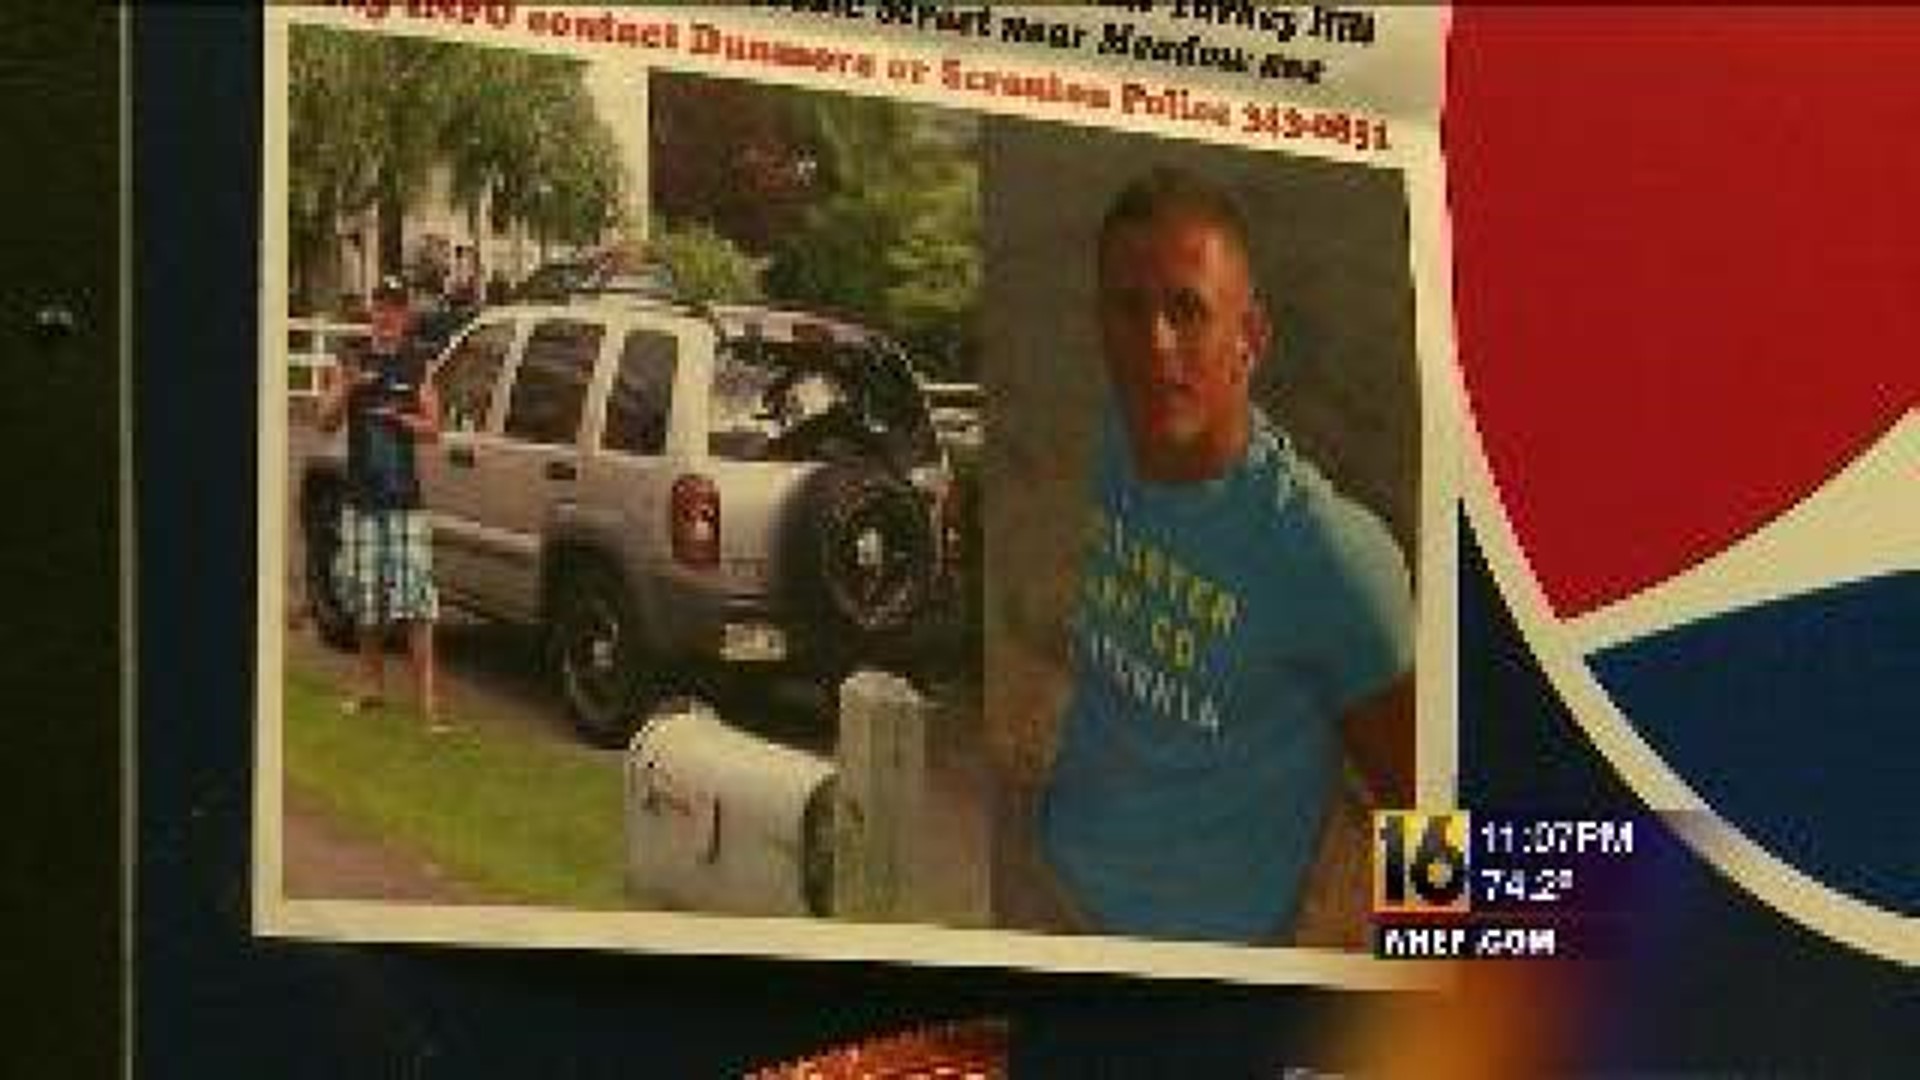 Police Search For Missing Dunmore Man